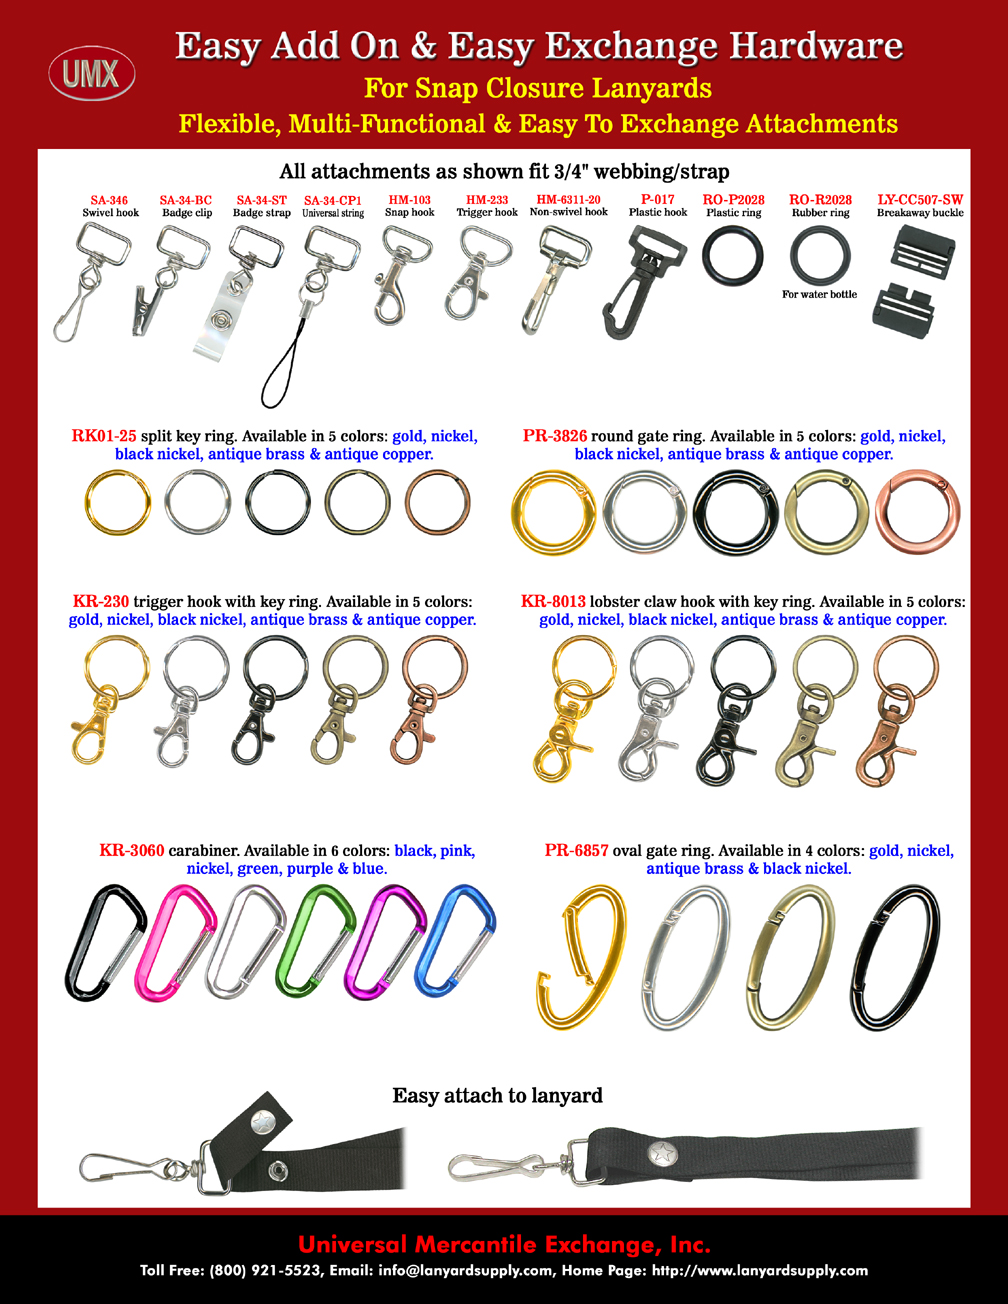 UMX Array Of Easy-Add-On Attachment For 3/4 Snap Closure Lanyards